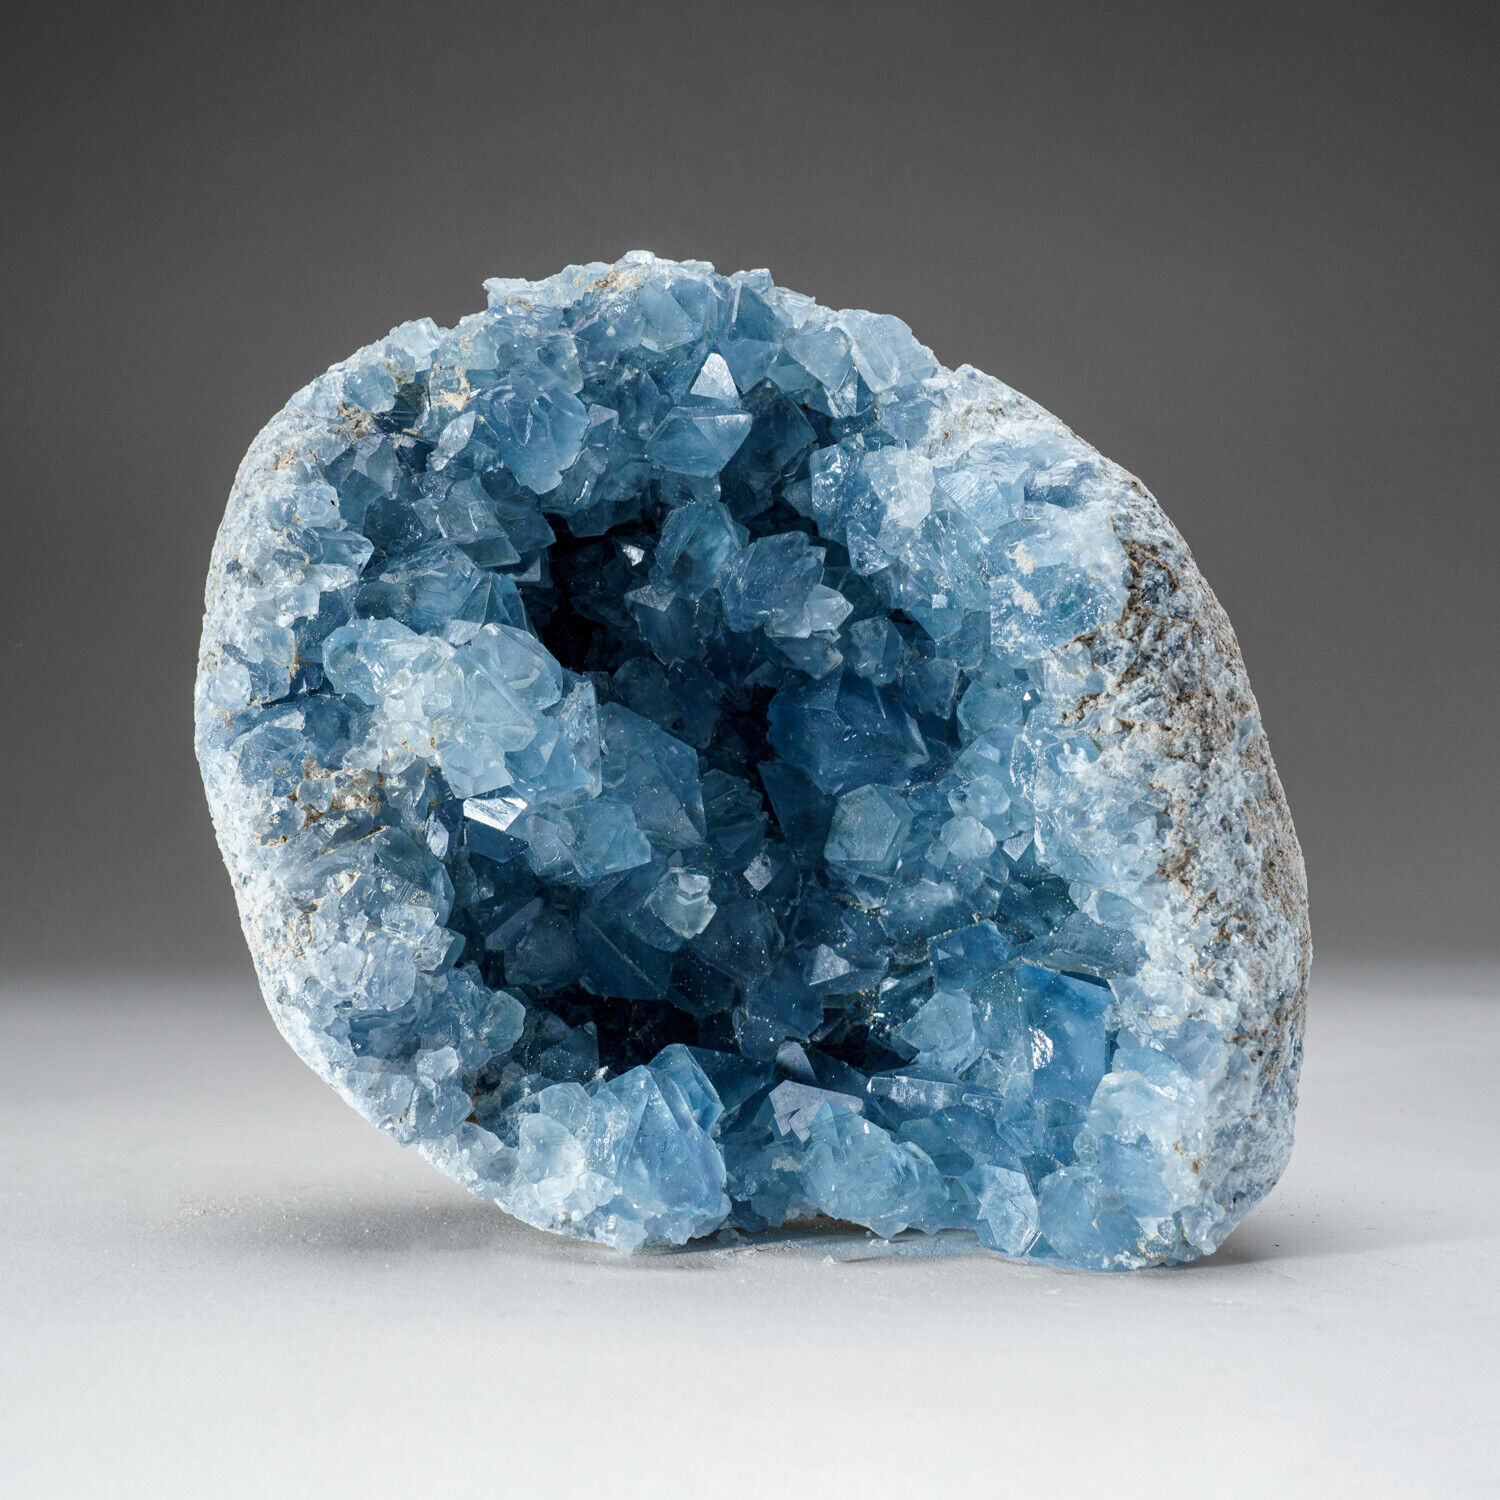 Blue Celestite Cluster Geode From Sankoany, Madagascar (6 lbs)